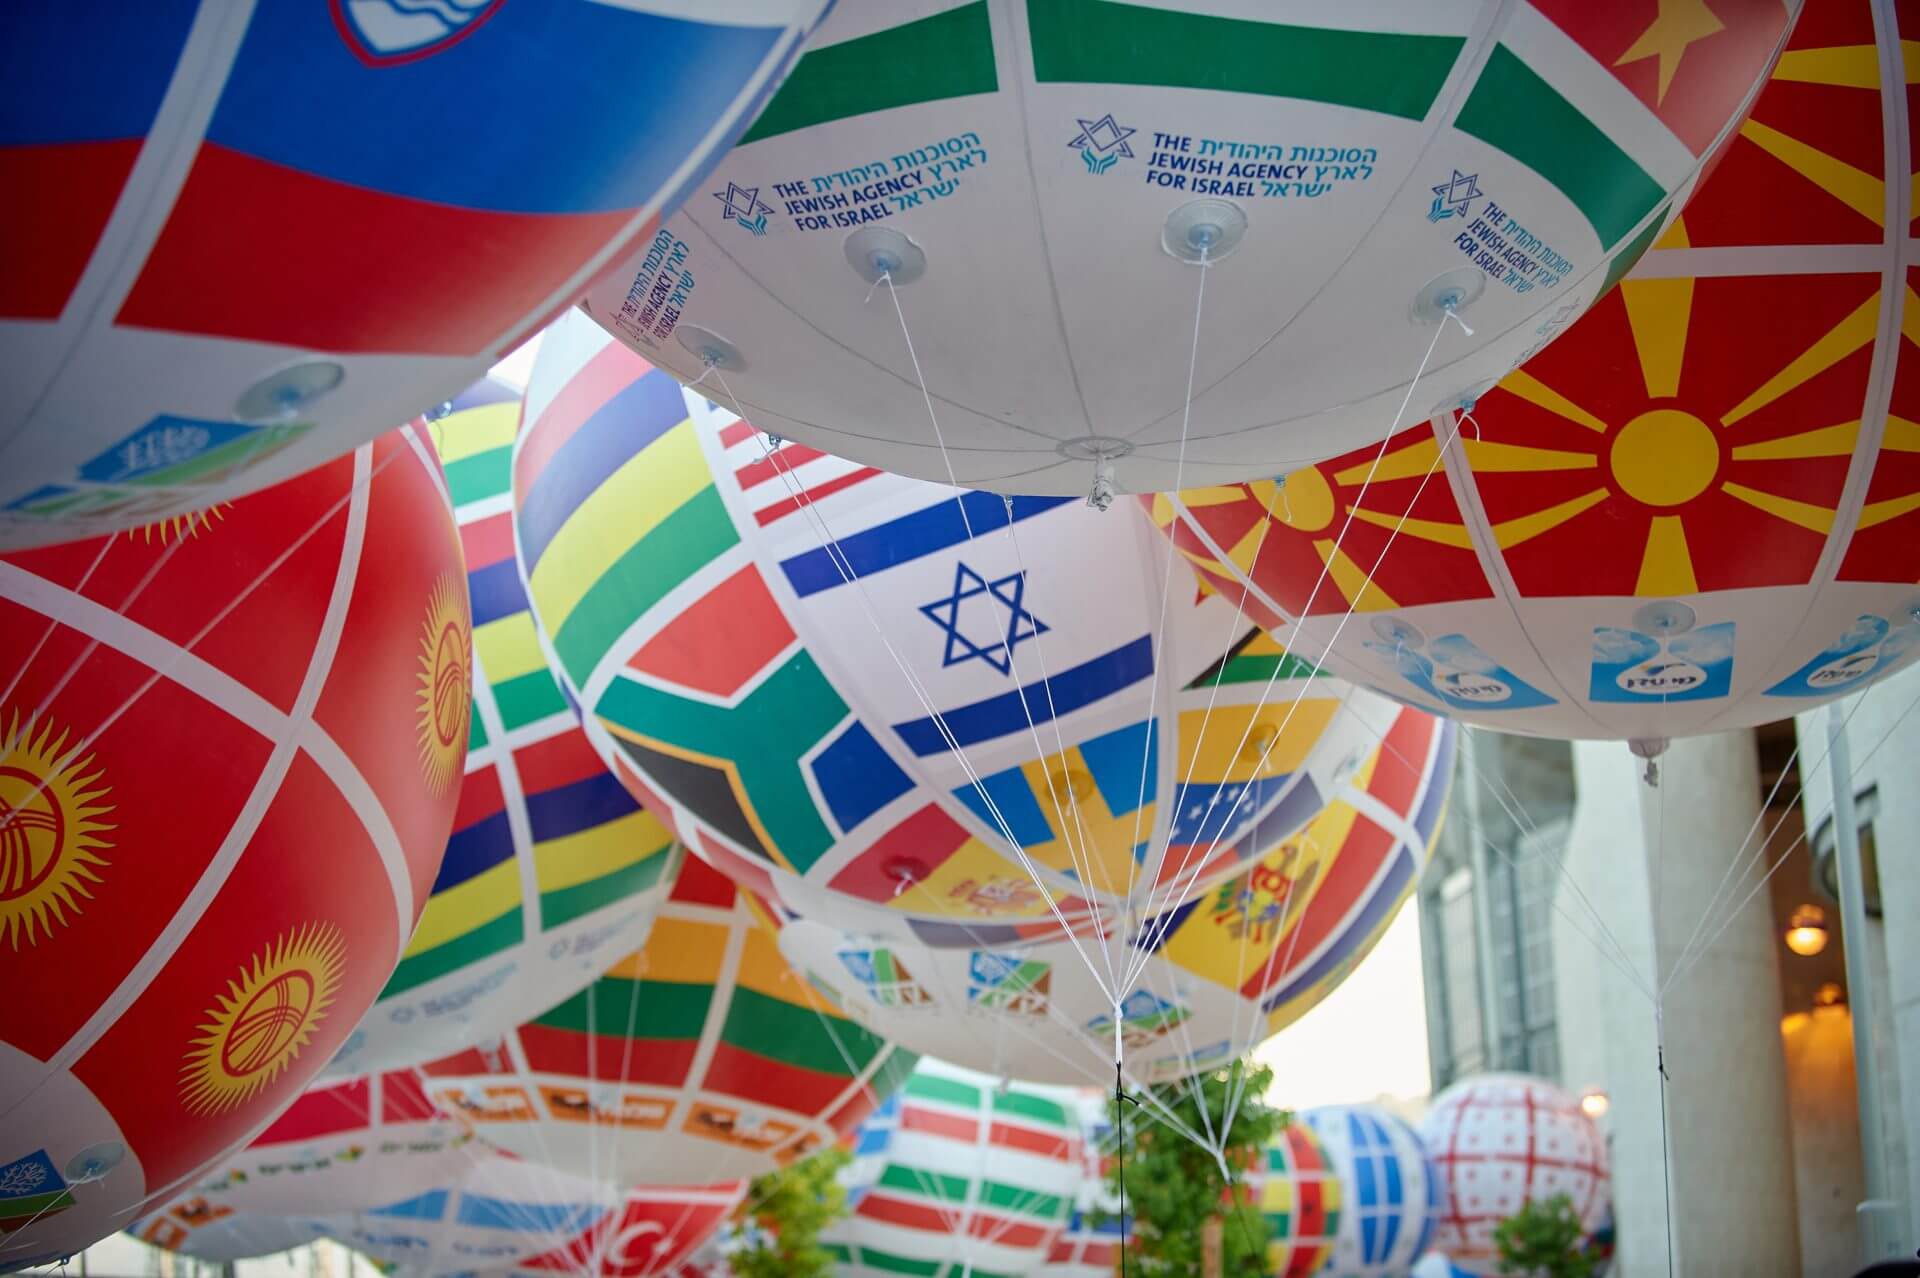 Balloons representing the different countries at the Maccabi games